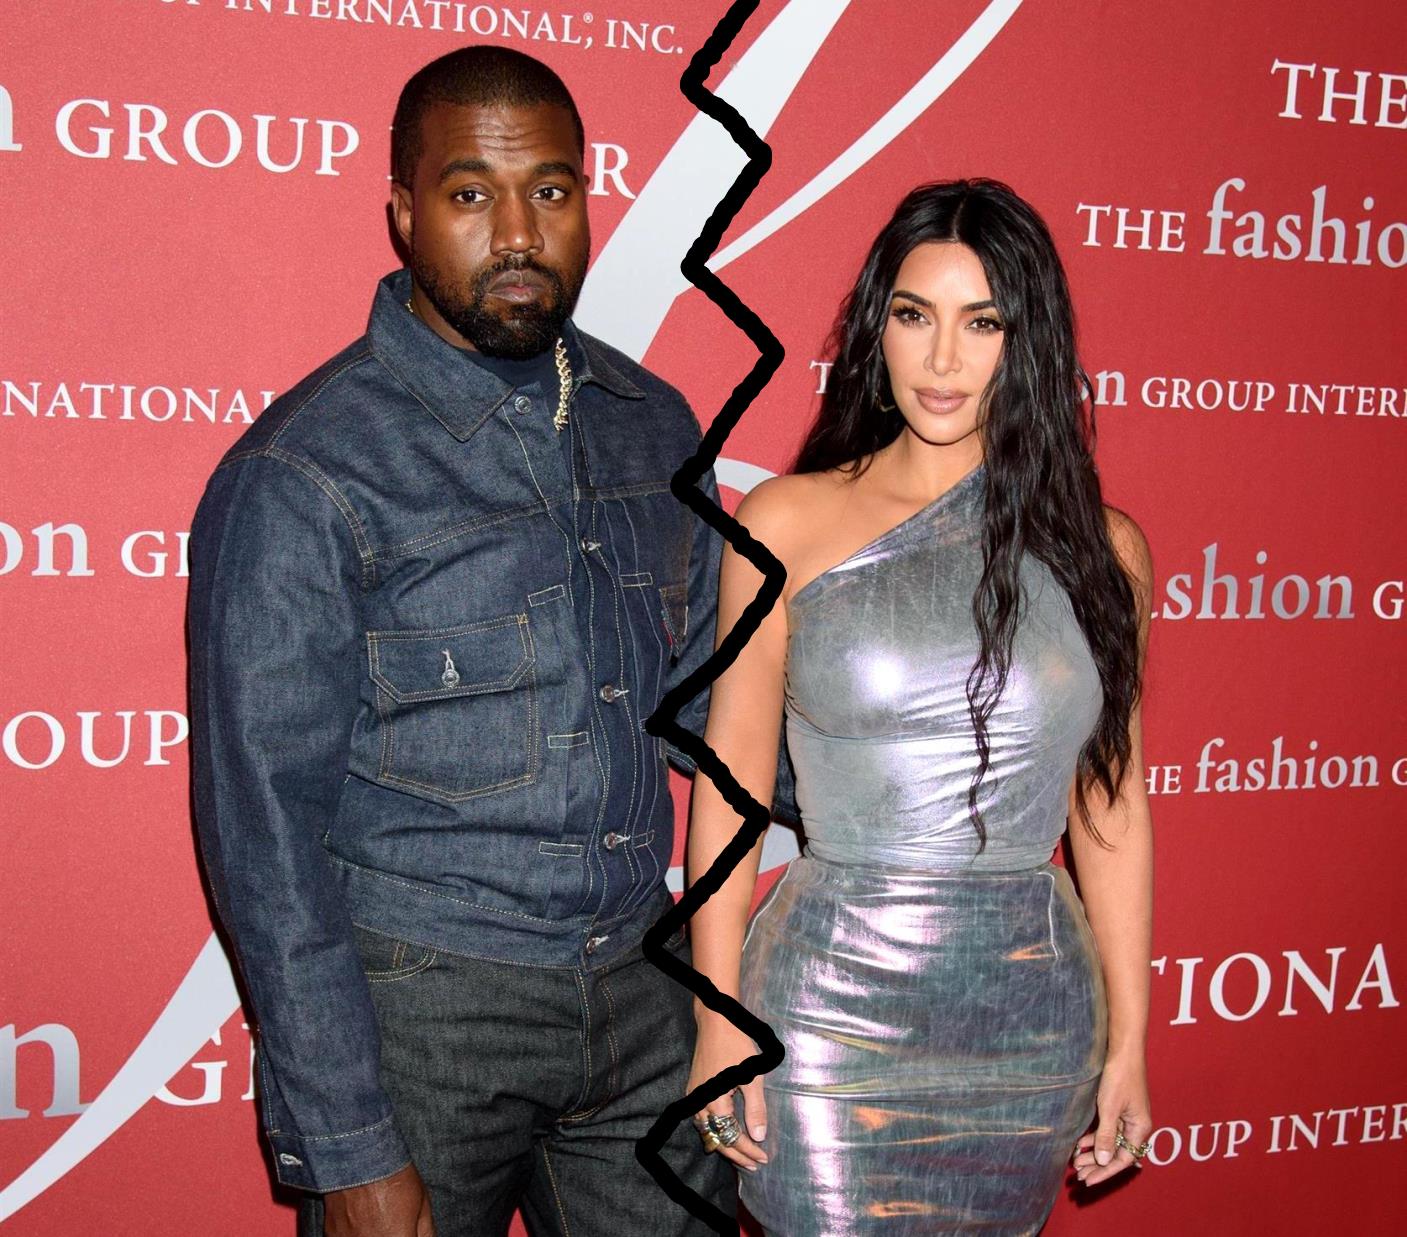 Kim Kardashian to Divorce Husband Kanye West After 6 Years of Marriage, Hires Attorney Laura Wasser as She Prepares to Fight for Calabasas Home, Plus How Kardashian Family is Reacting